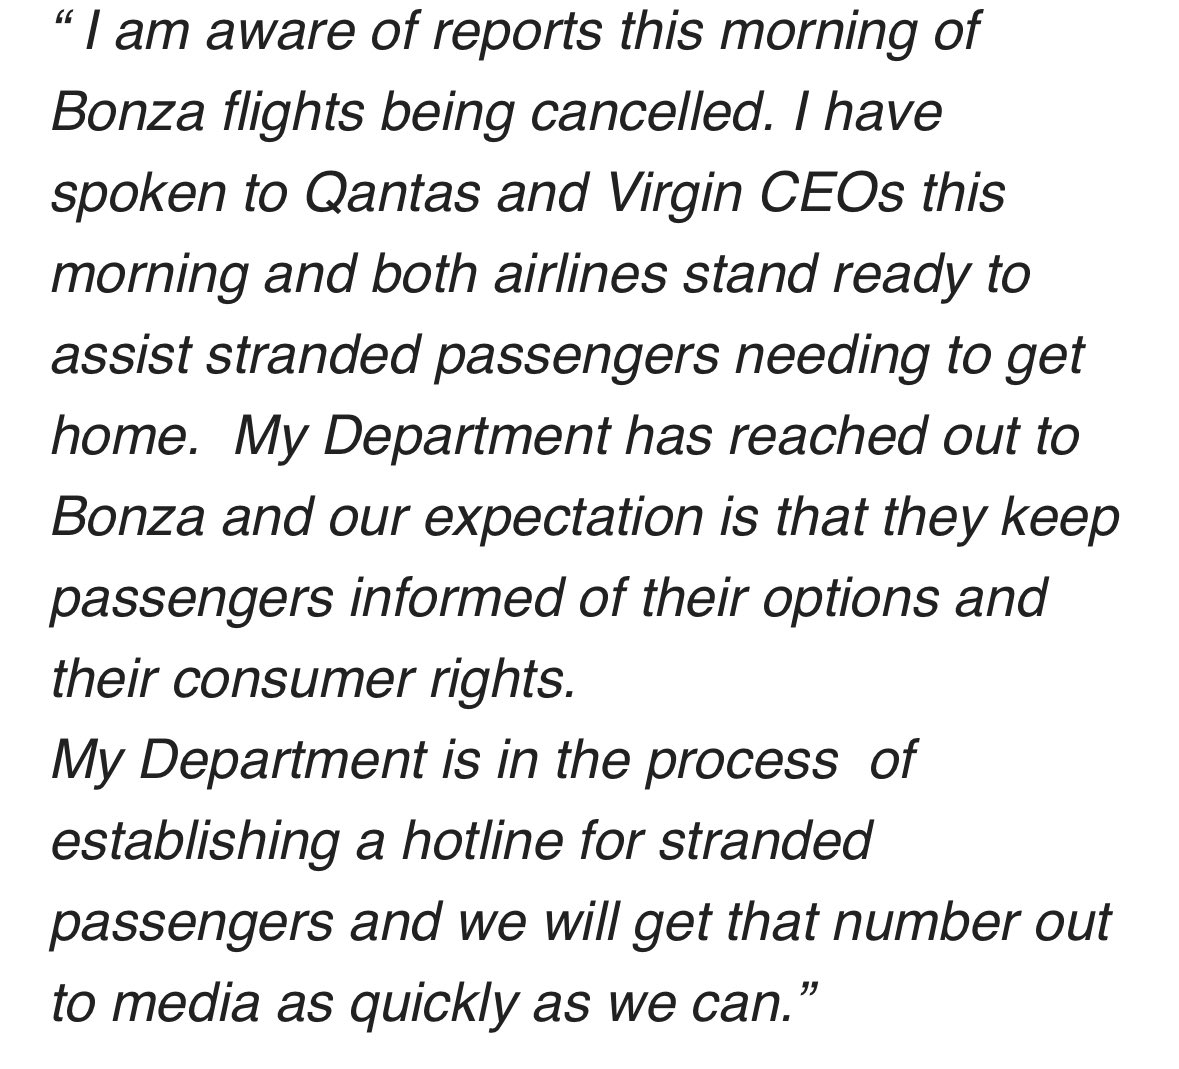 Catherine King statement: “My Department has reached out to Bonza and our expectation is that they keep passengers informed of their options and their consumer rights” | @6NewsAU